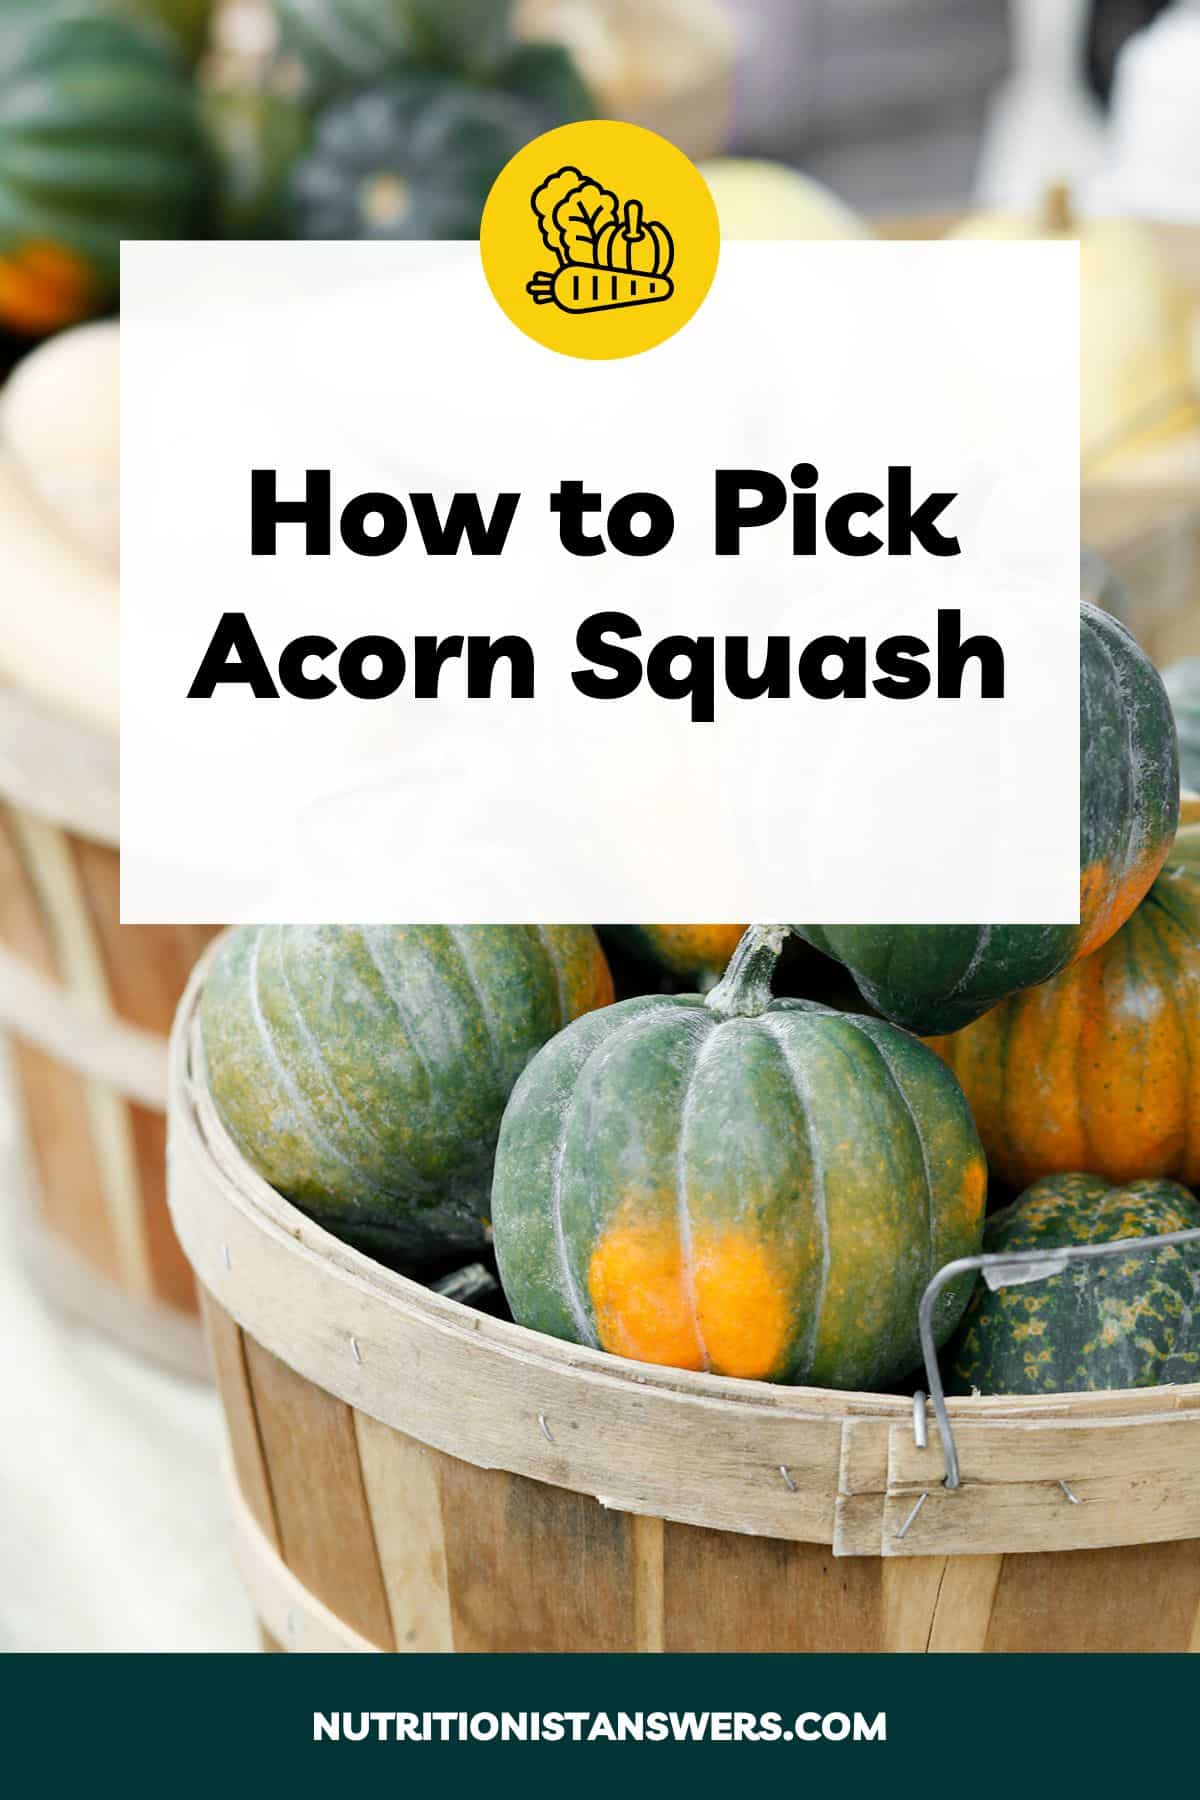 How to Pick Acorn Squash: Tips from a Nutritionist